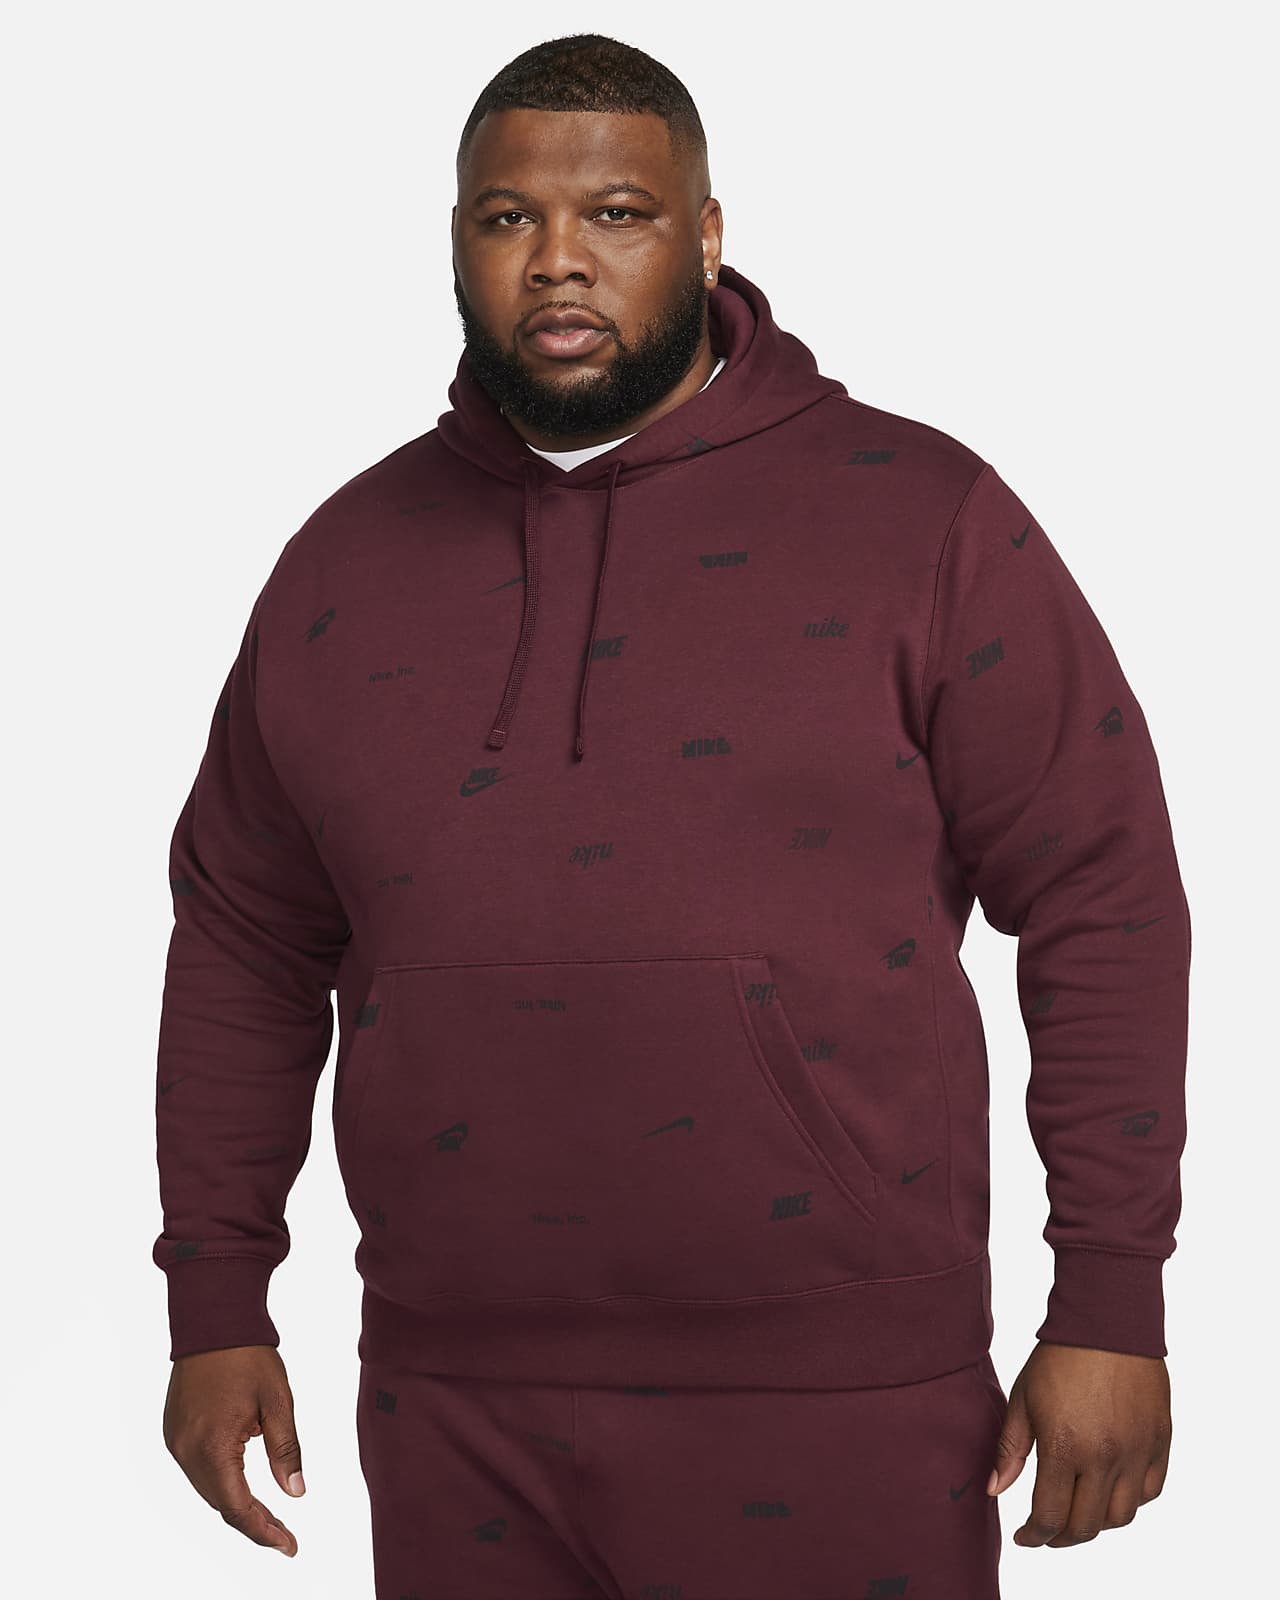 https://static.nike.com/a/images/t_PDP_1280_v1/f_auto,q_auto:eco/4508e57f-1048-4d2e-a948-ba0dad7d4158/club-fleece-mens-allover-print-pullover-hoodie-fLPMcq.png